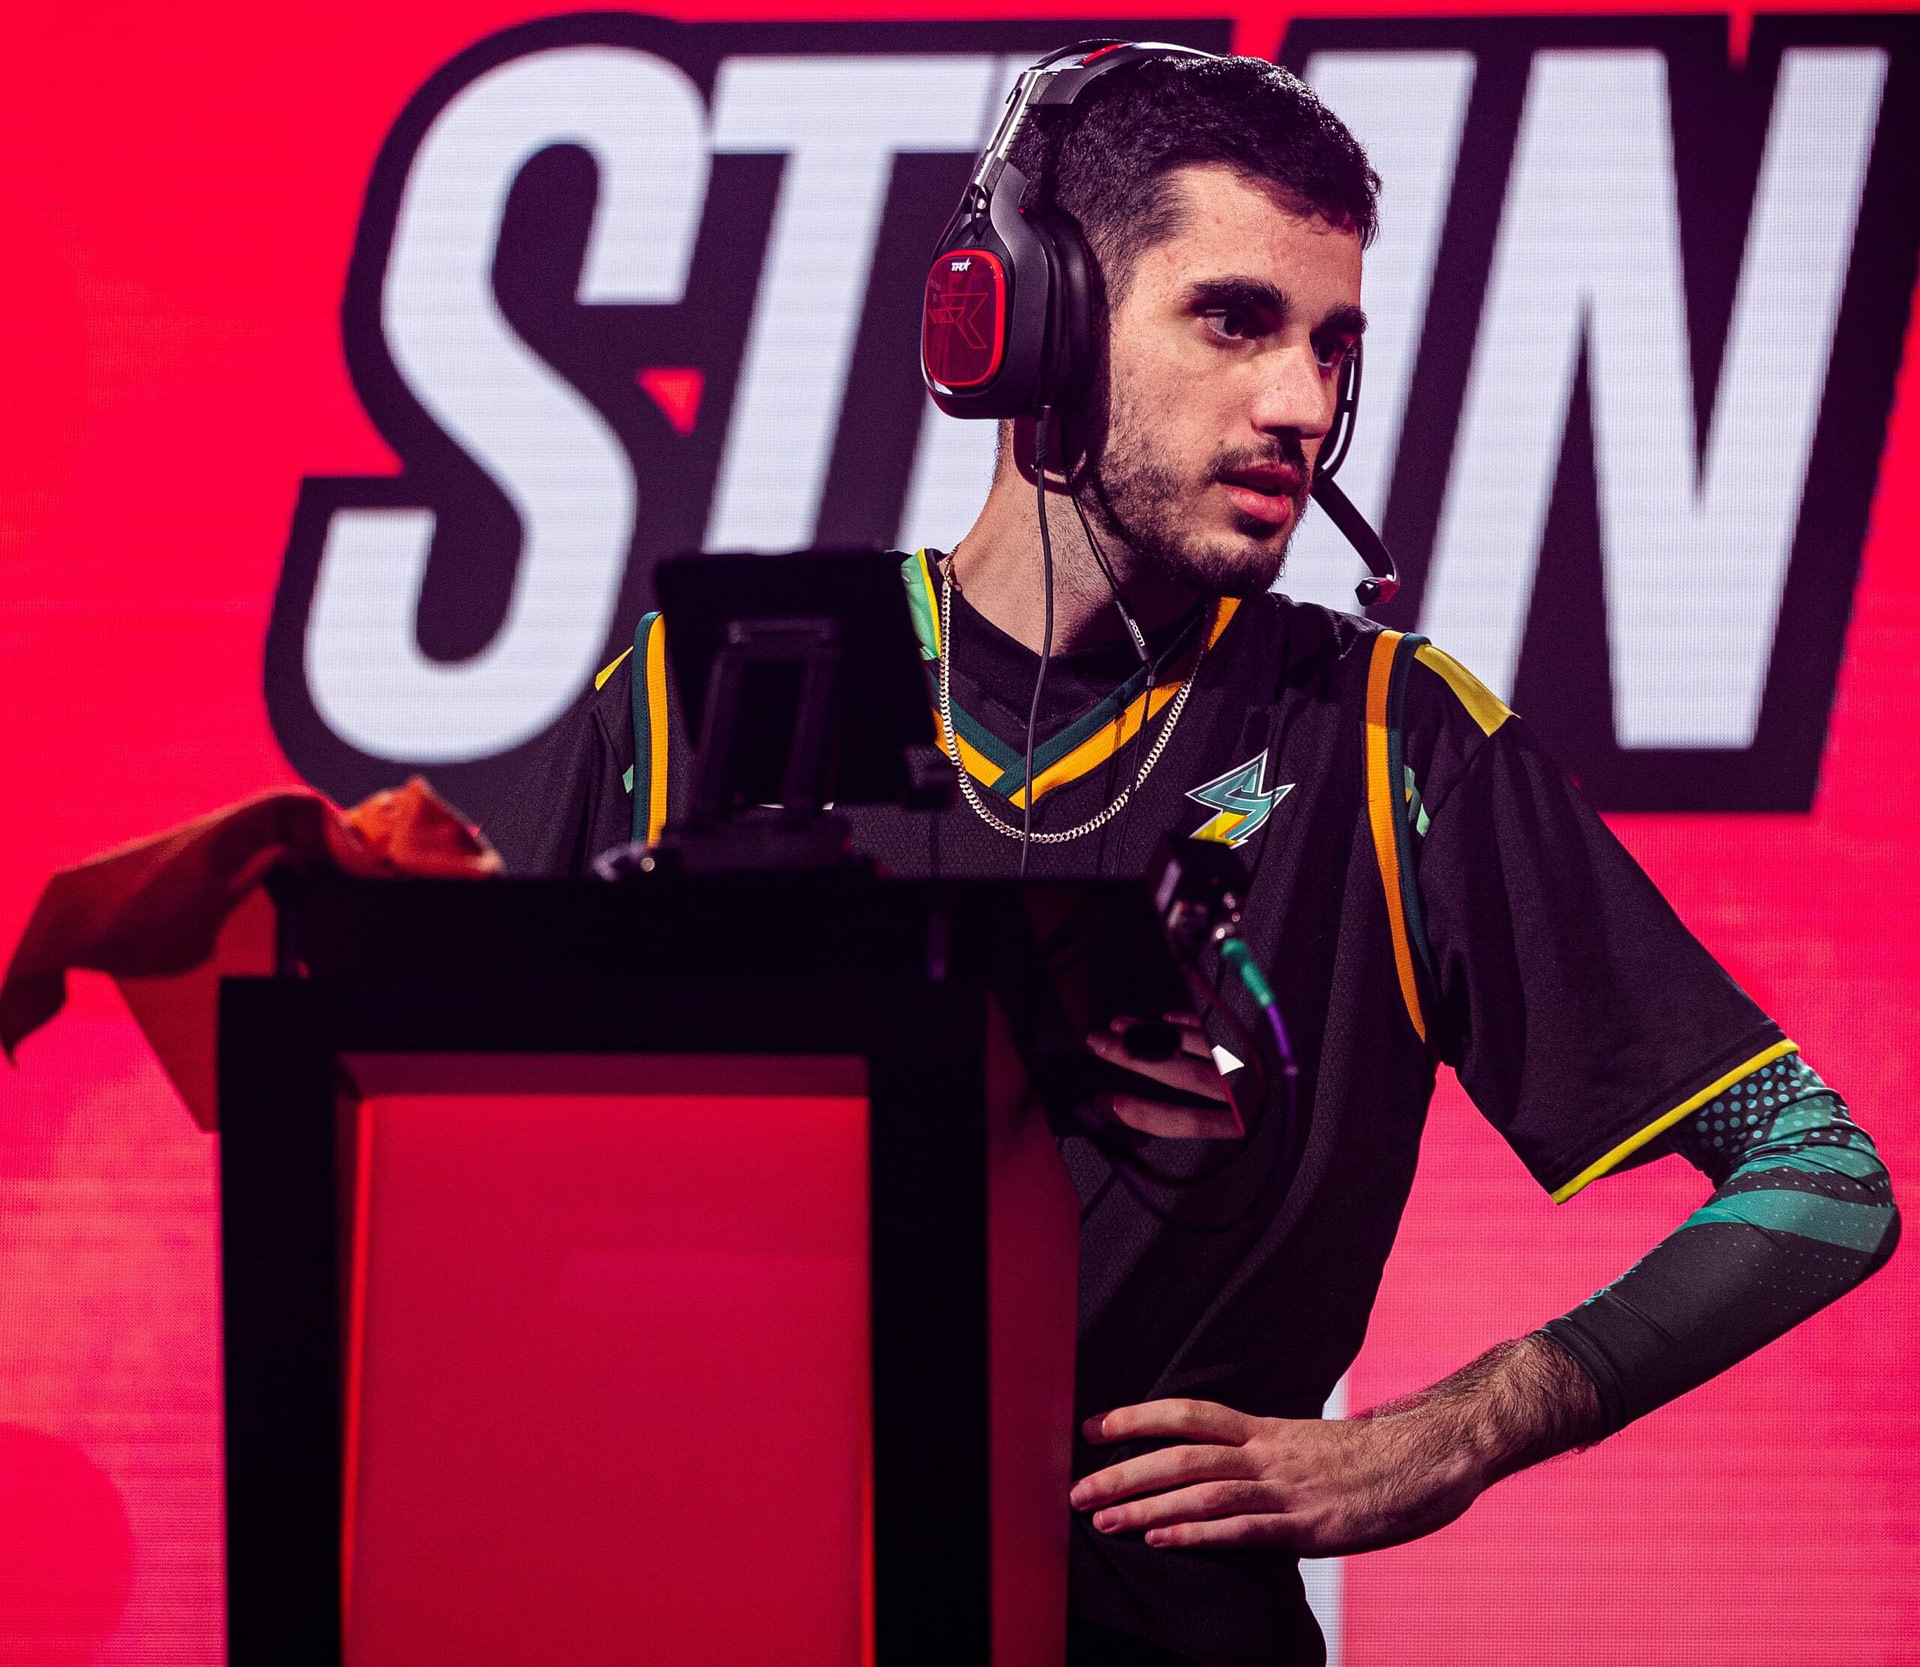 How STMN’s OG and Bobby went from Rivals to Teammates